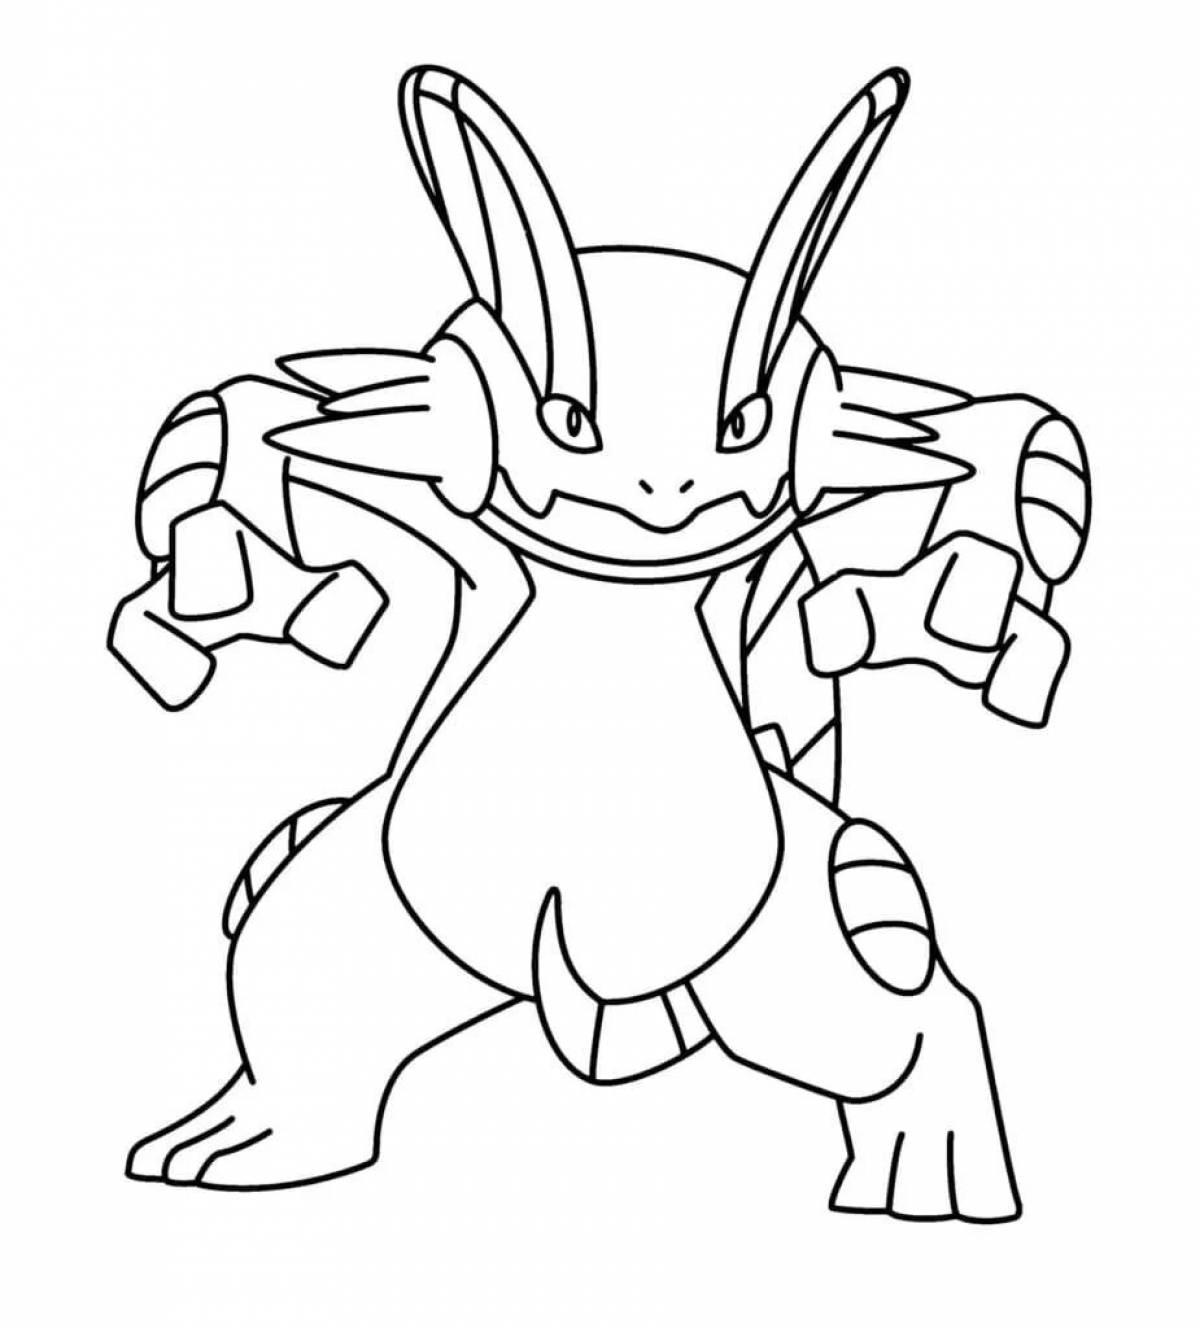 Tempting good quality pokemon coloring page